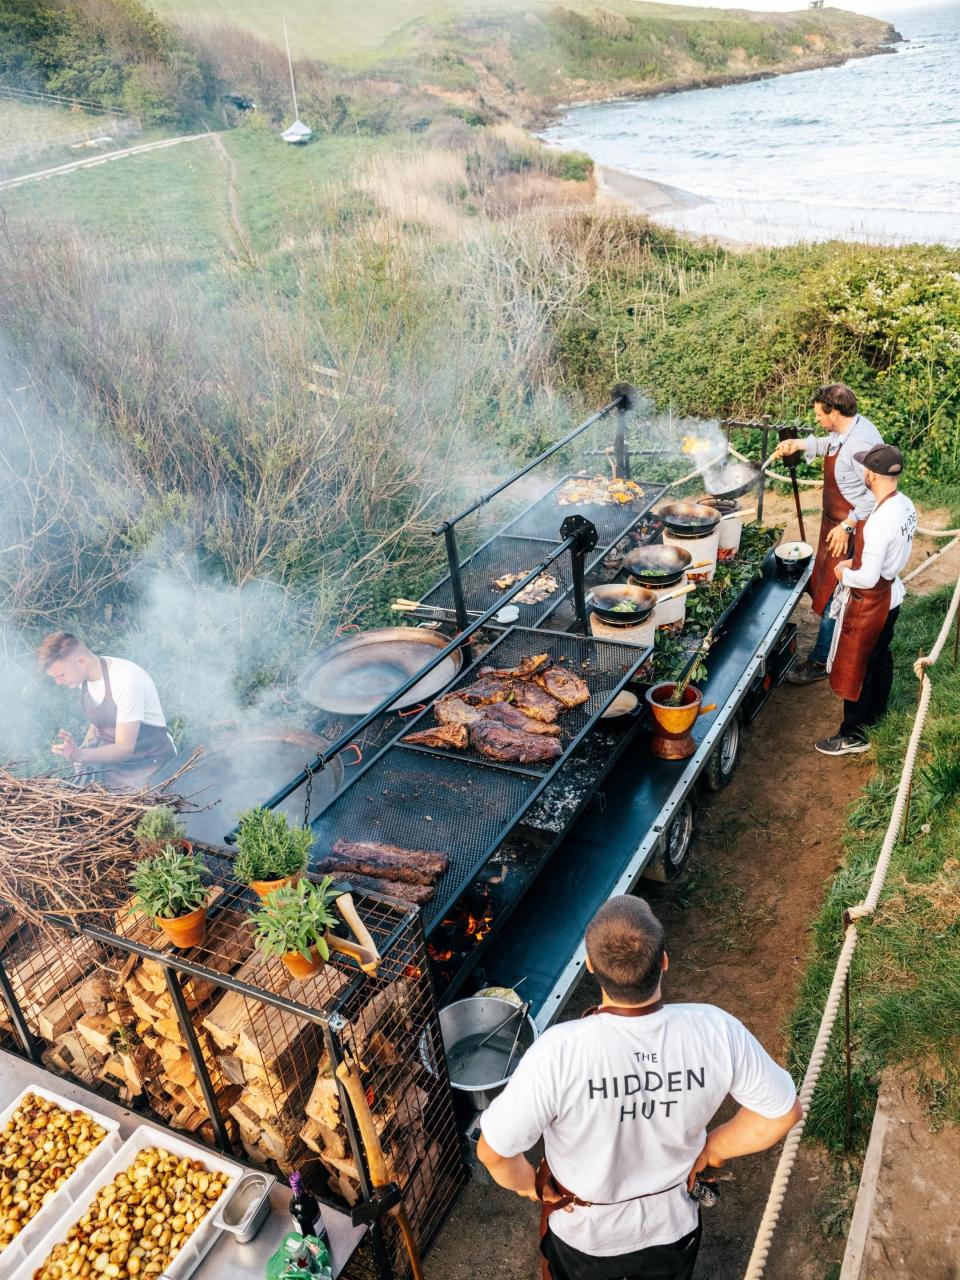 The Hidden Hut's 50ft mobile grill in action - Danny North